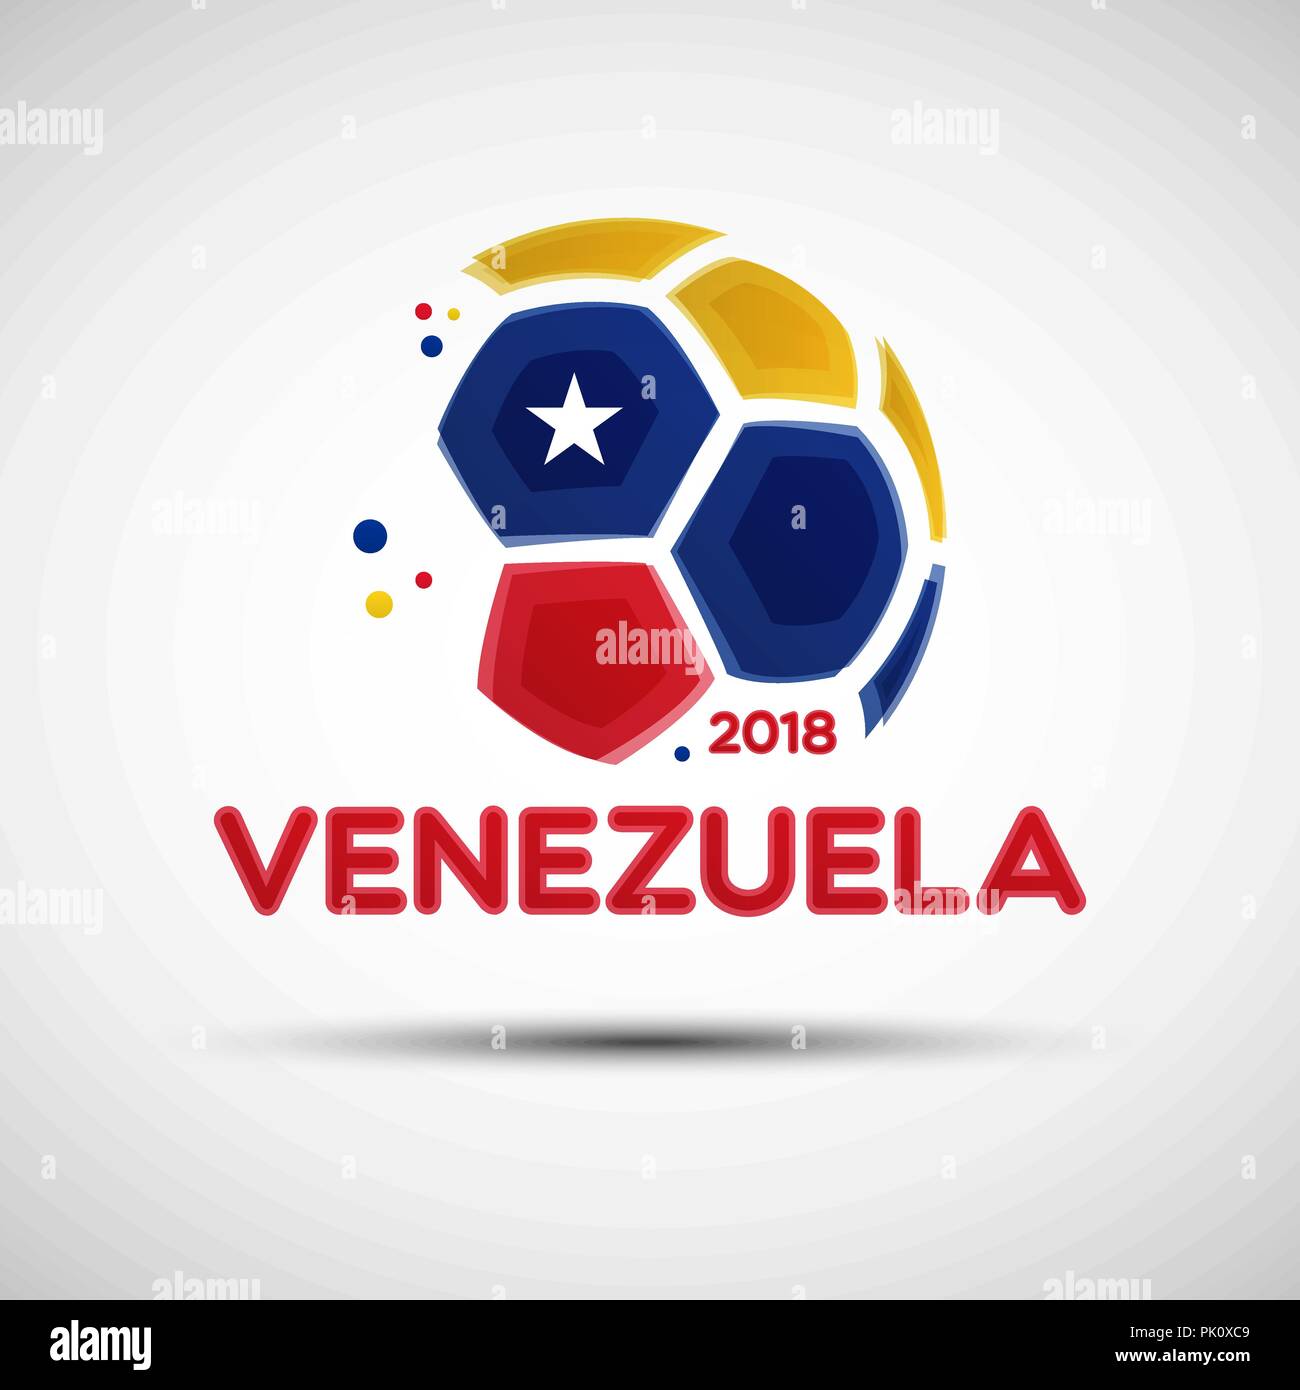 Football championship banner. Flag of Venezuela. Vector illustration of abstract soccer ball with Venezuelan national flag colors for your design Stock Vector